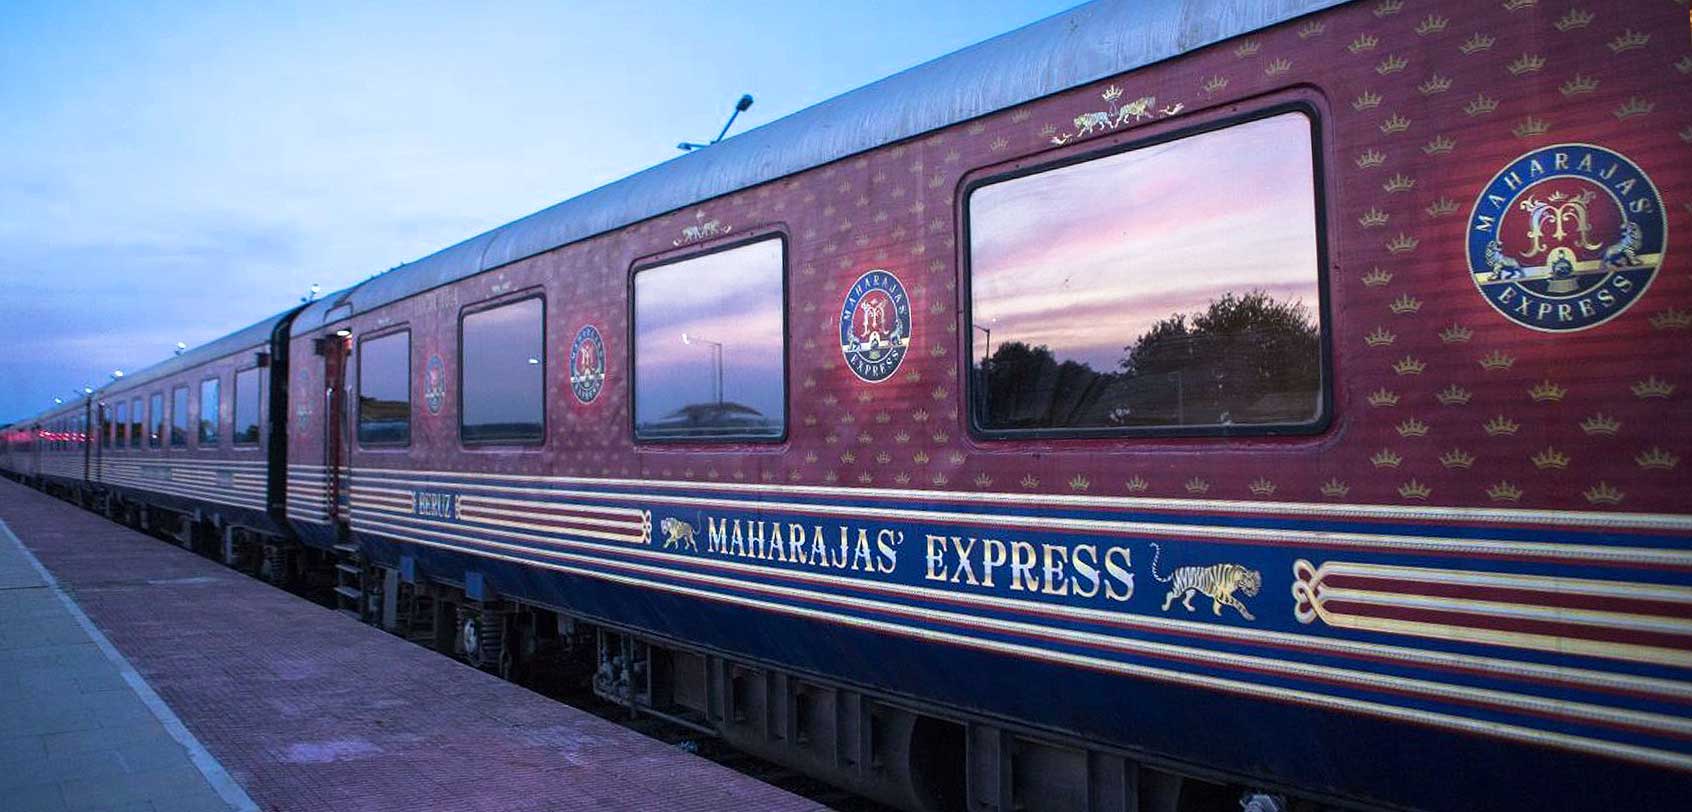 Top 10 Reasons to Explore India in The Maharajas Express Luxury Train ...